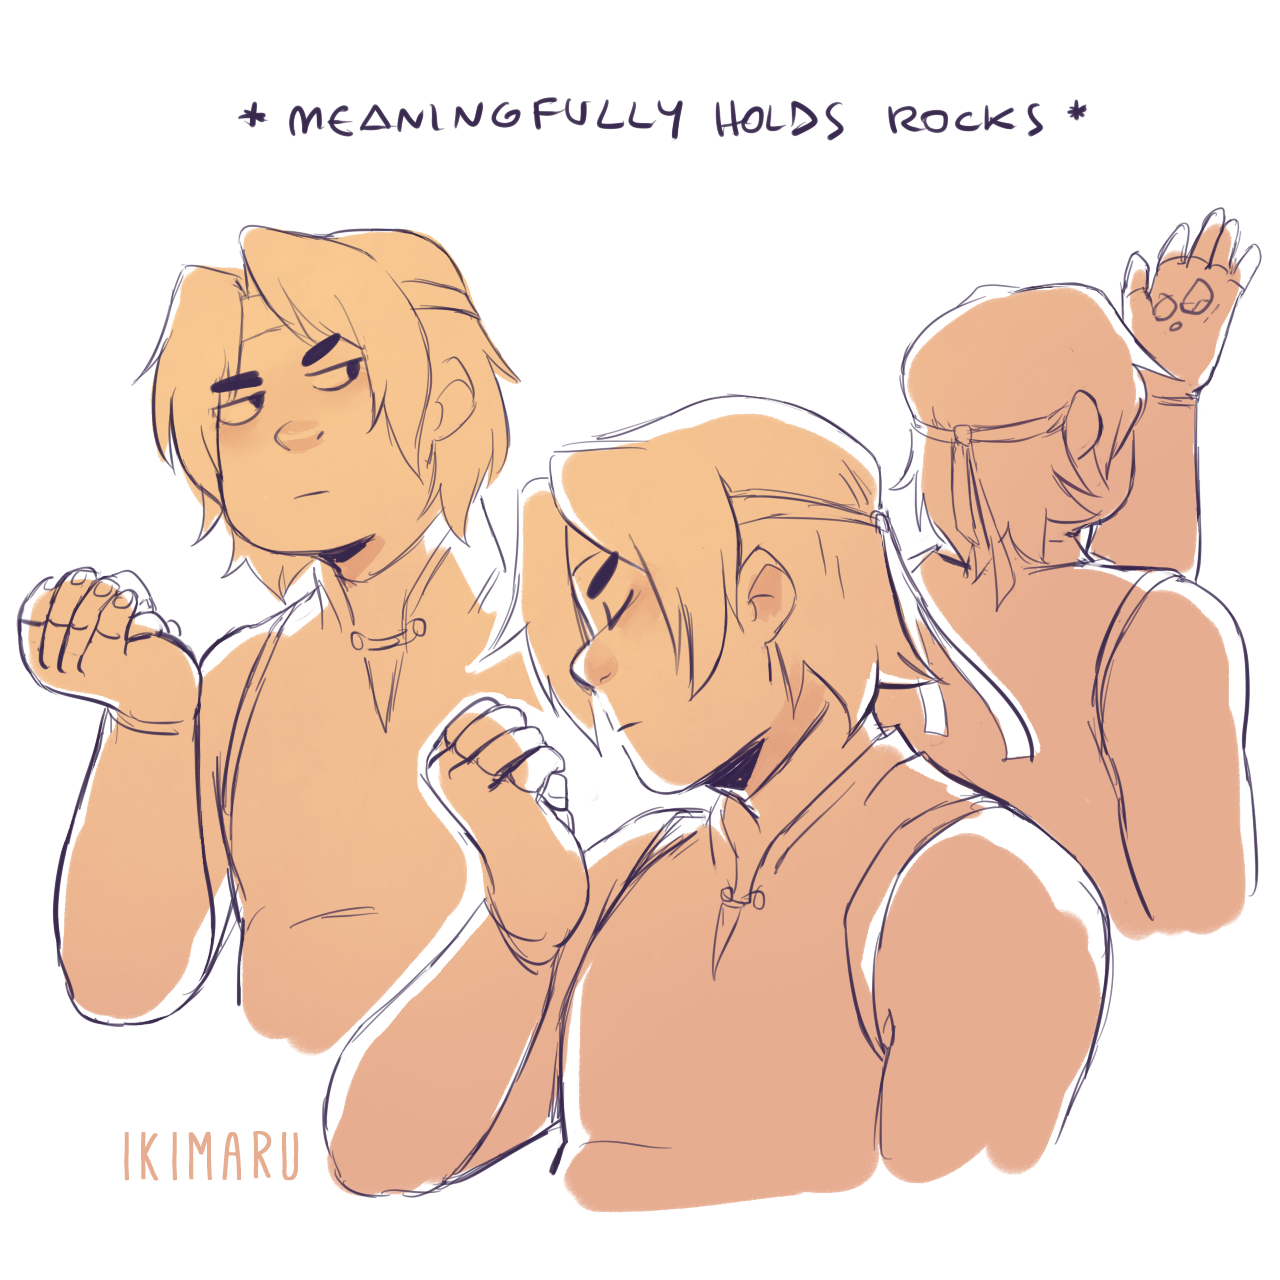 ikimaru: some more stuff about this au! c: Lance &amp; co are elemental nymps